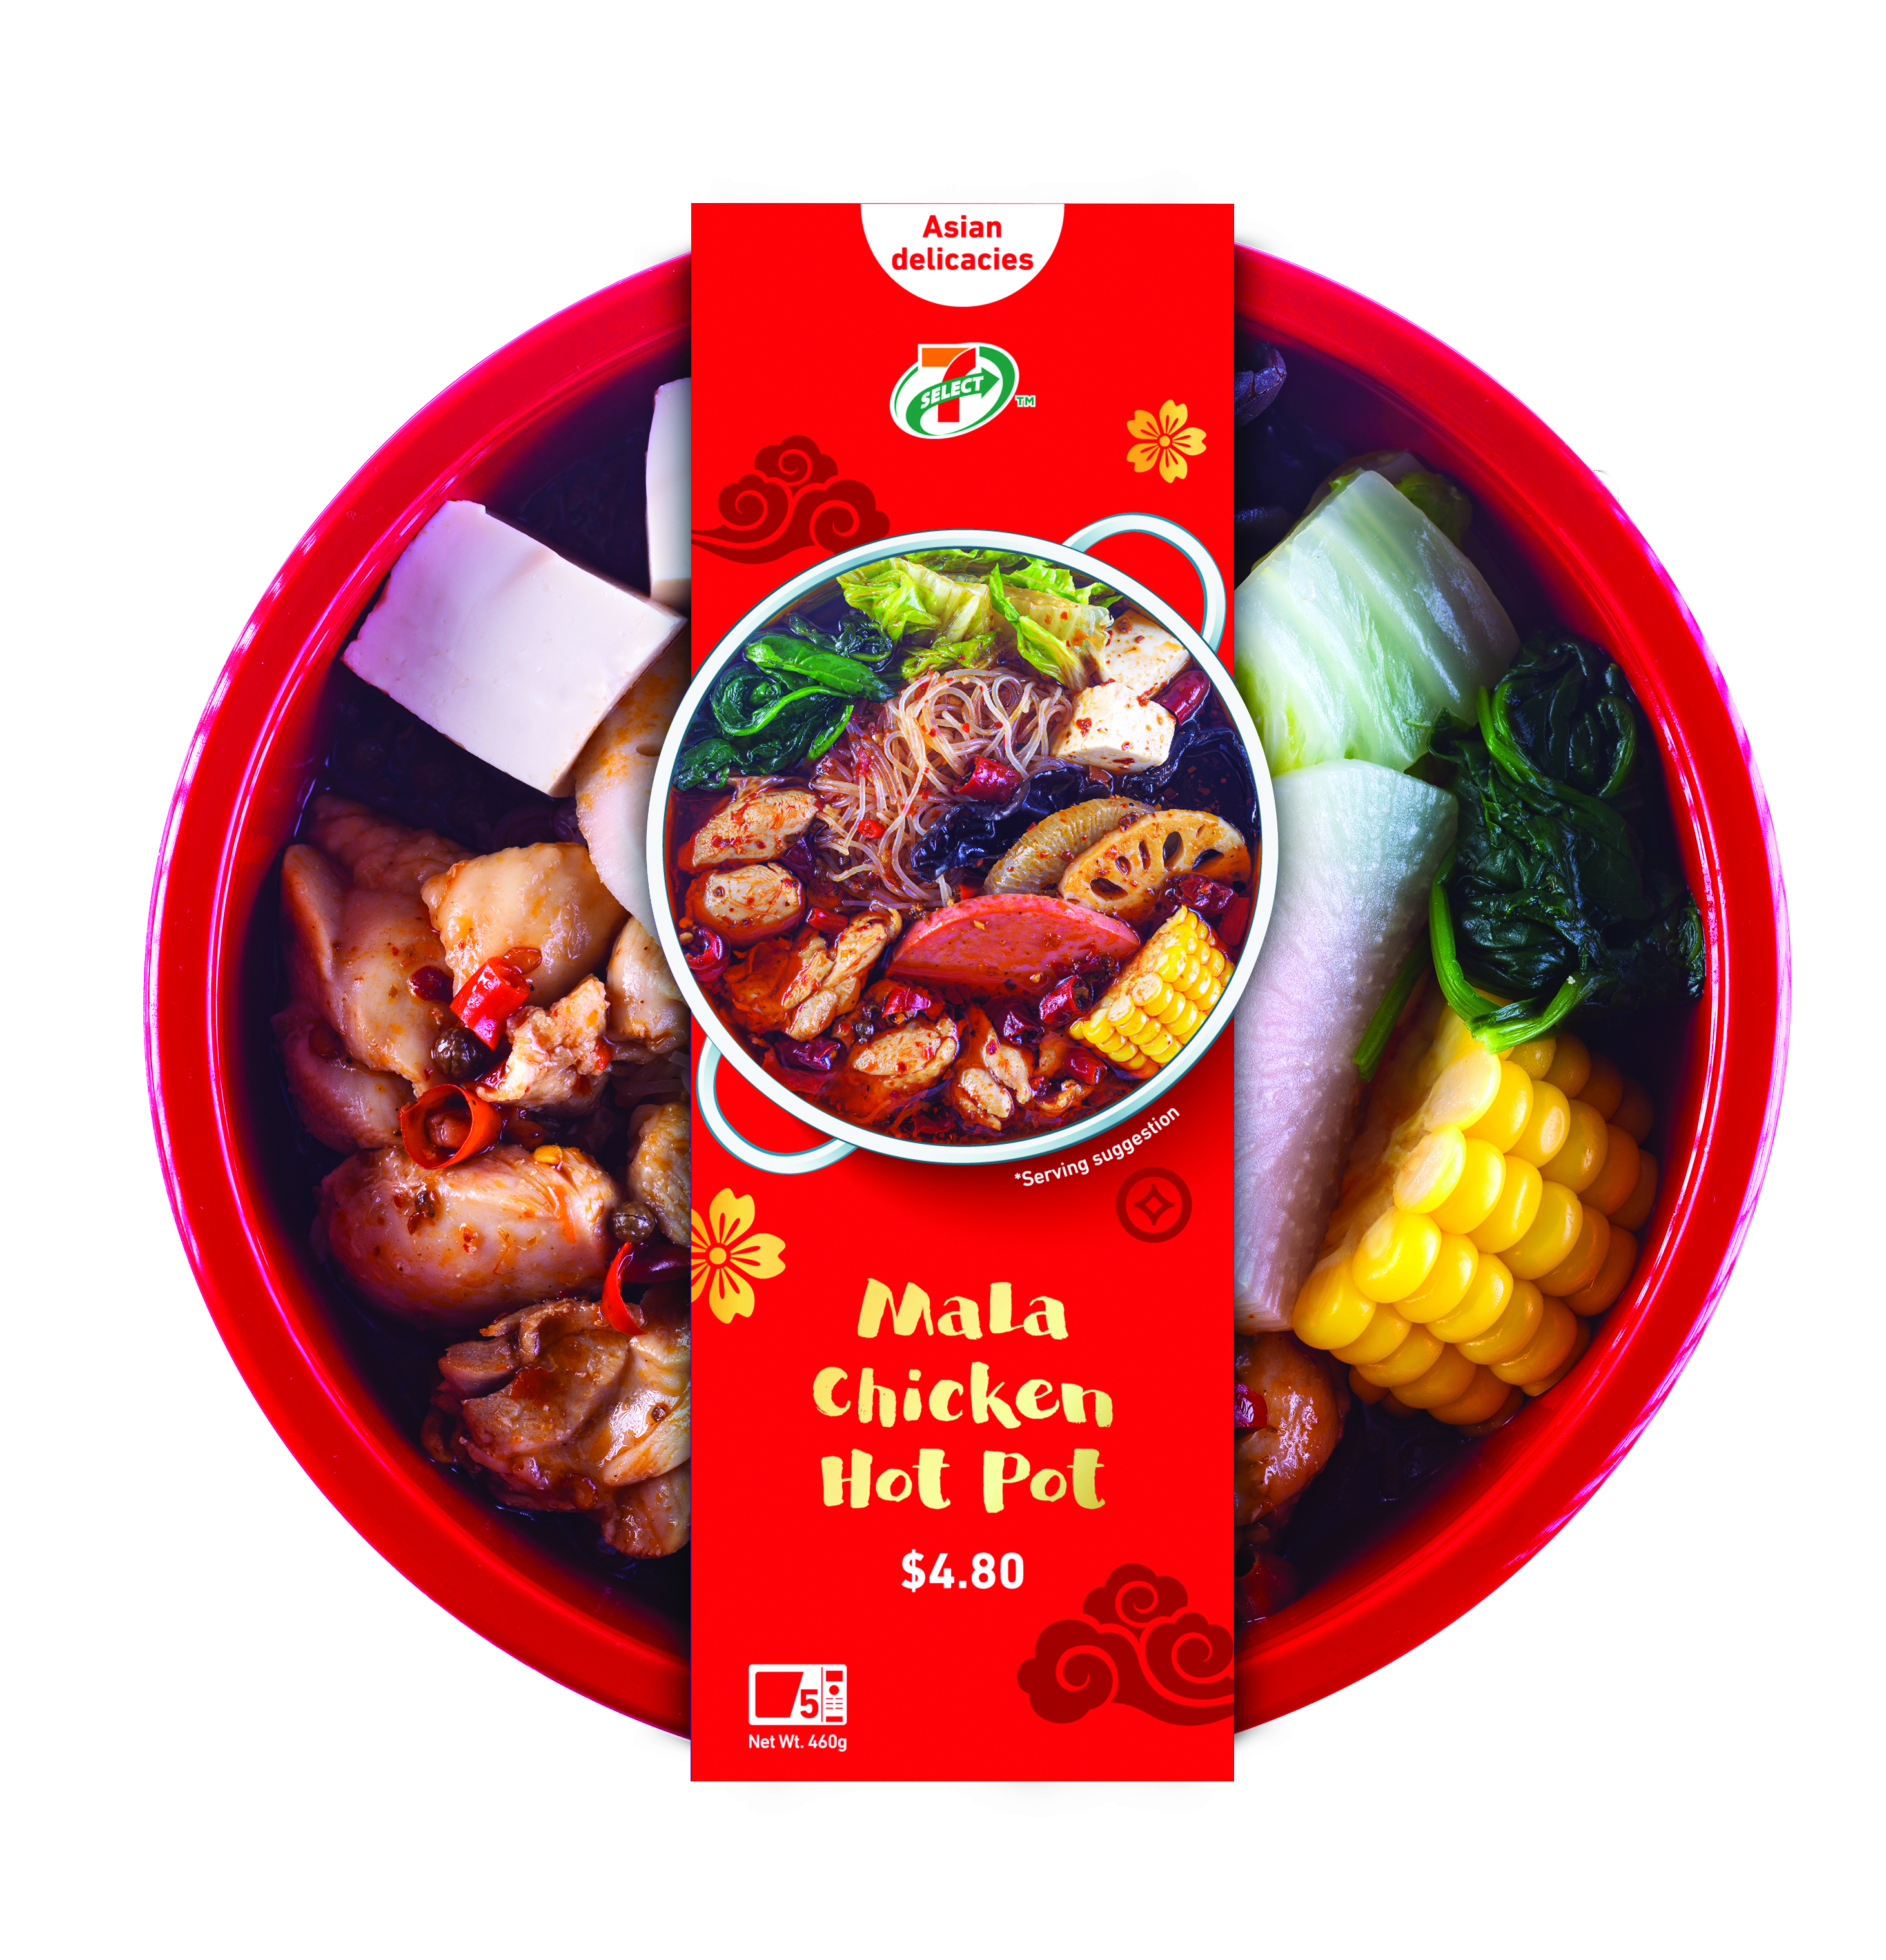 7-Eleven S’pore Launches Ready-To-Eat Personal Hot Pots, Has Mala Chicken, Tomato Seafood and Herbal Chicken - 1